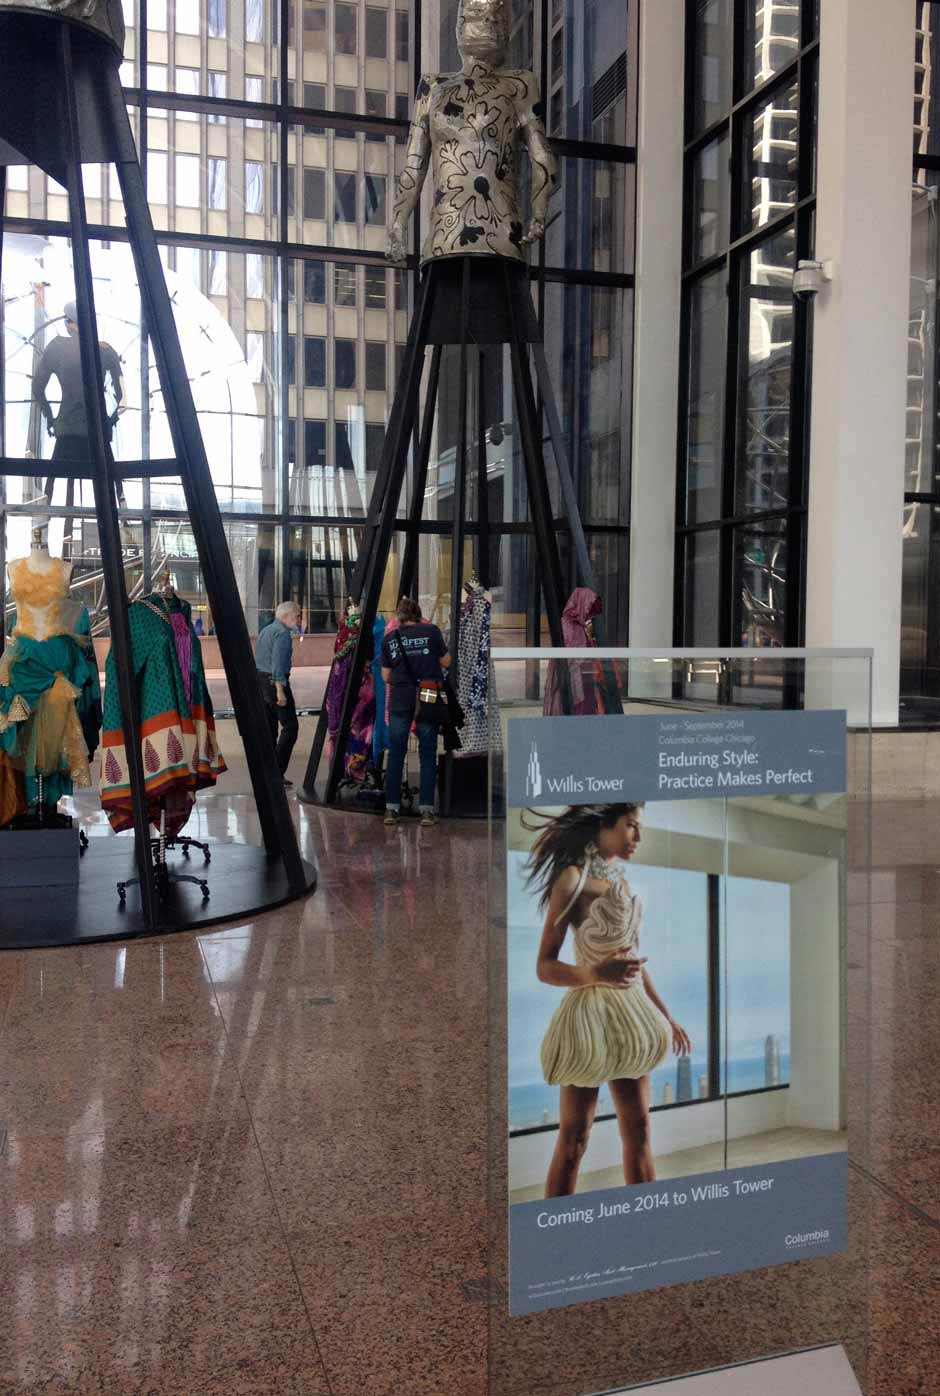 Columbia College Chicago's Enduring Style: Practice Makes Perfect Fashion Exhibition at Willis Tower